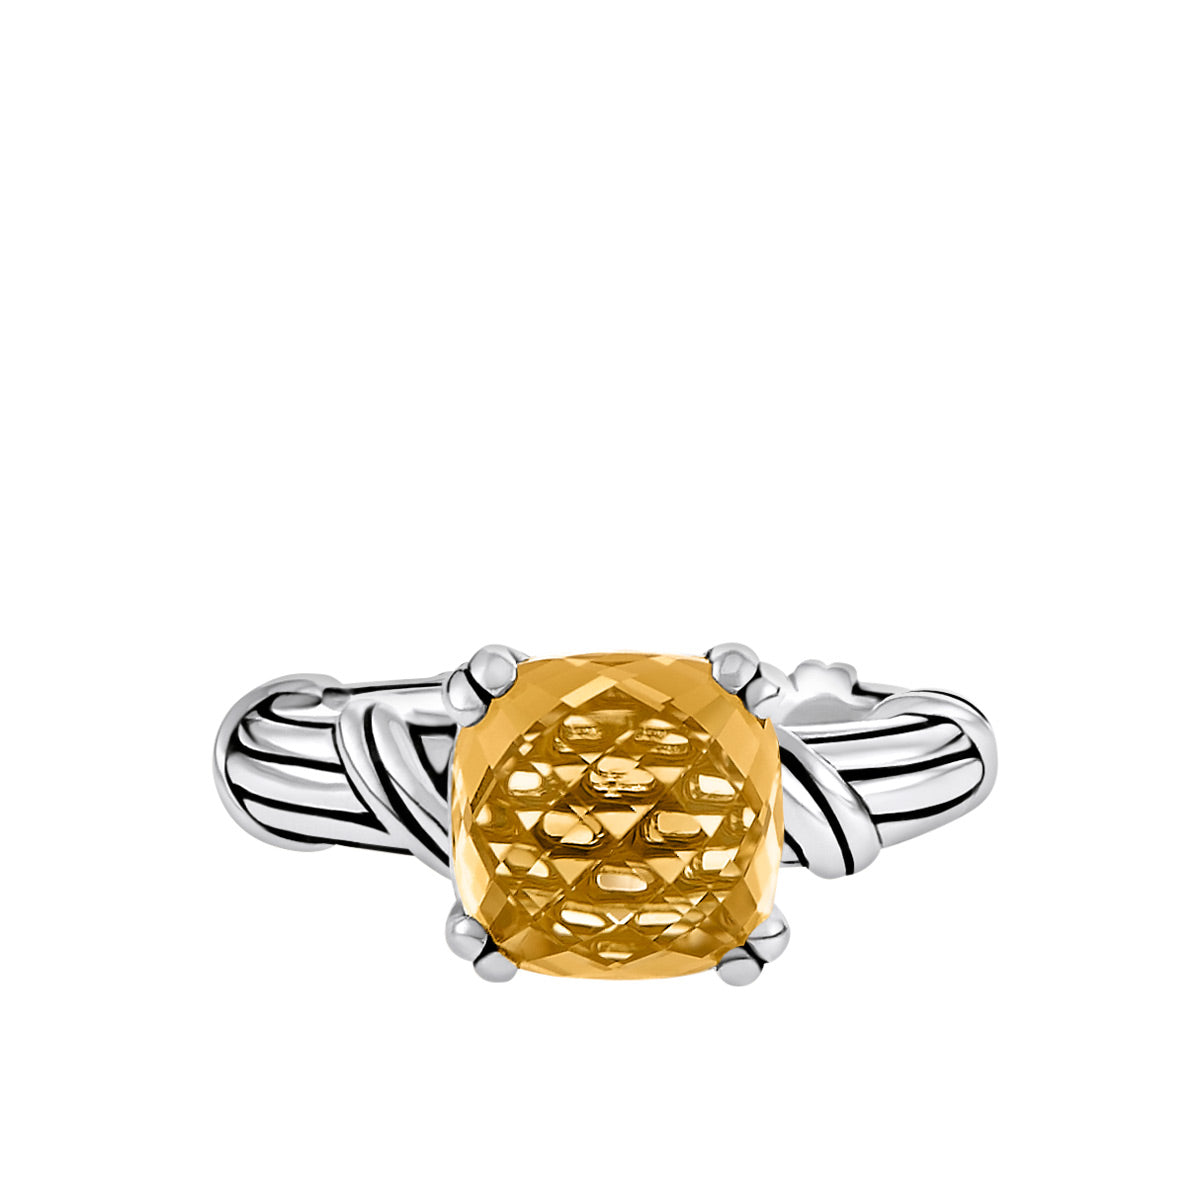 Fantasies Citrine Cocktail Ring in sterling silver 10mm